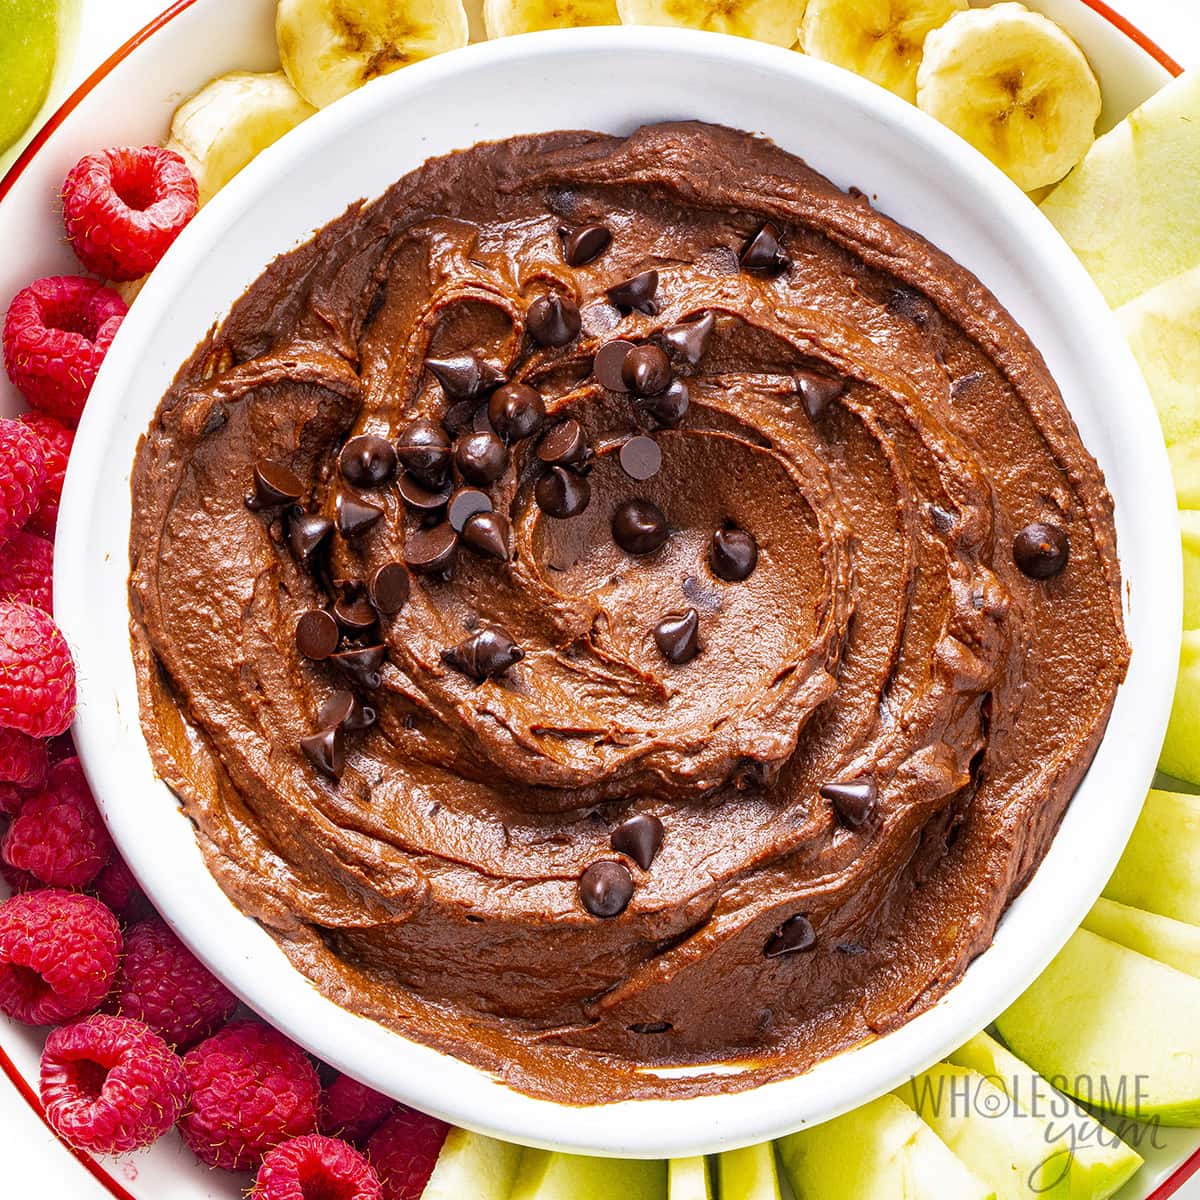 Chocolate hummus in a bowl on a platter.